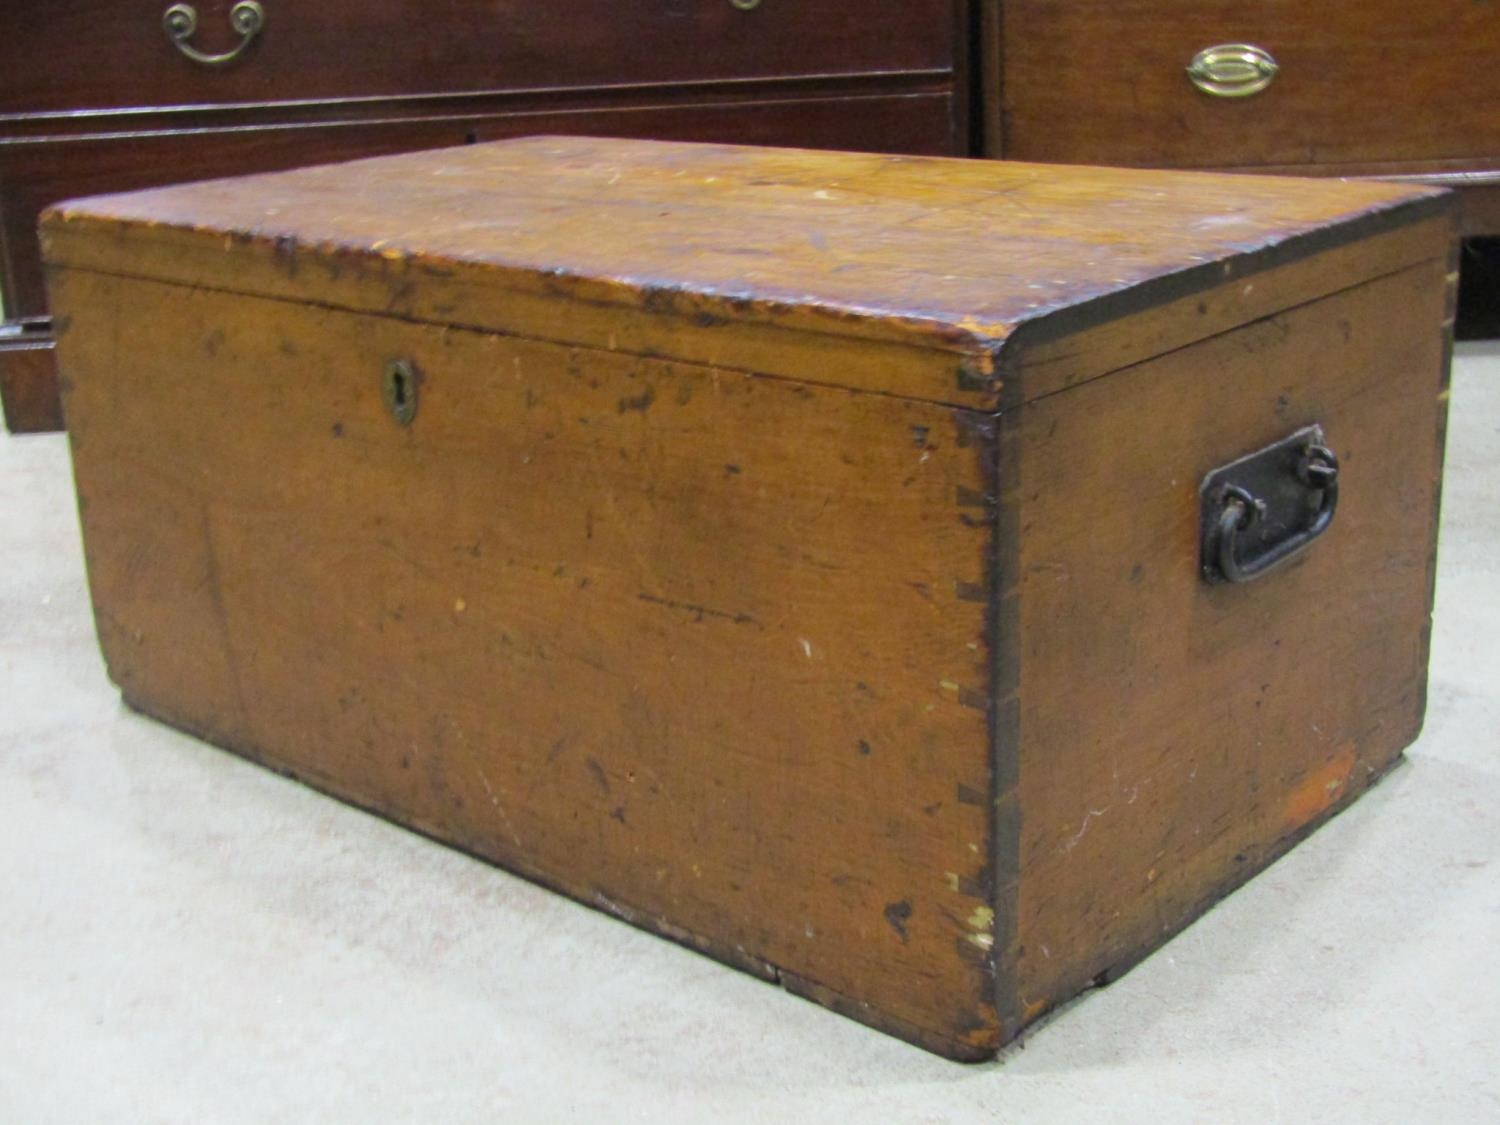 A 19th century pine blanket box with hinged lid and drop side iron work carrying handles, 80 cm wide - Image 3 of 4